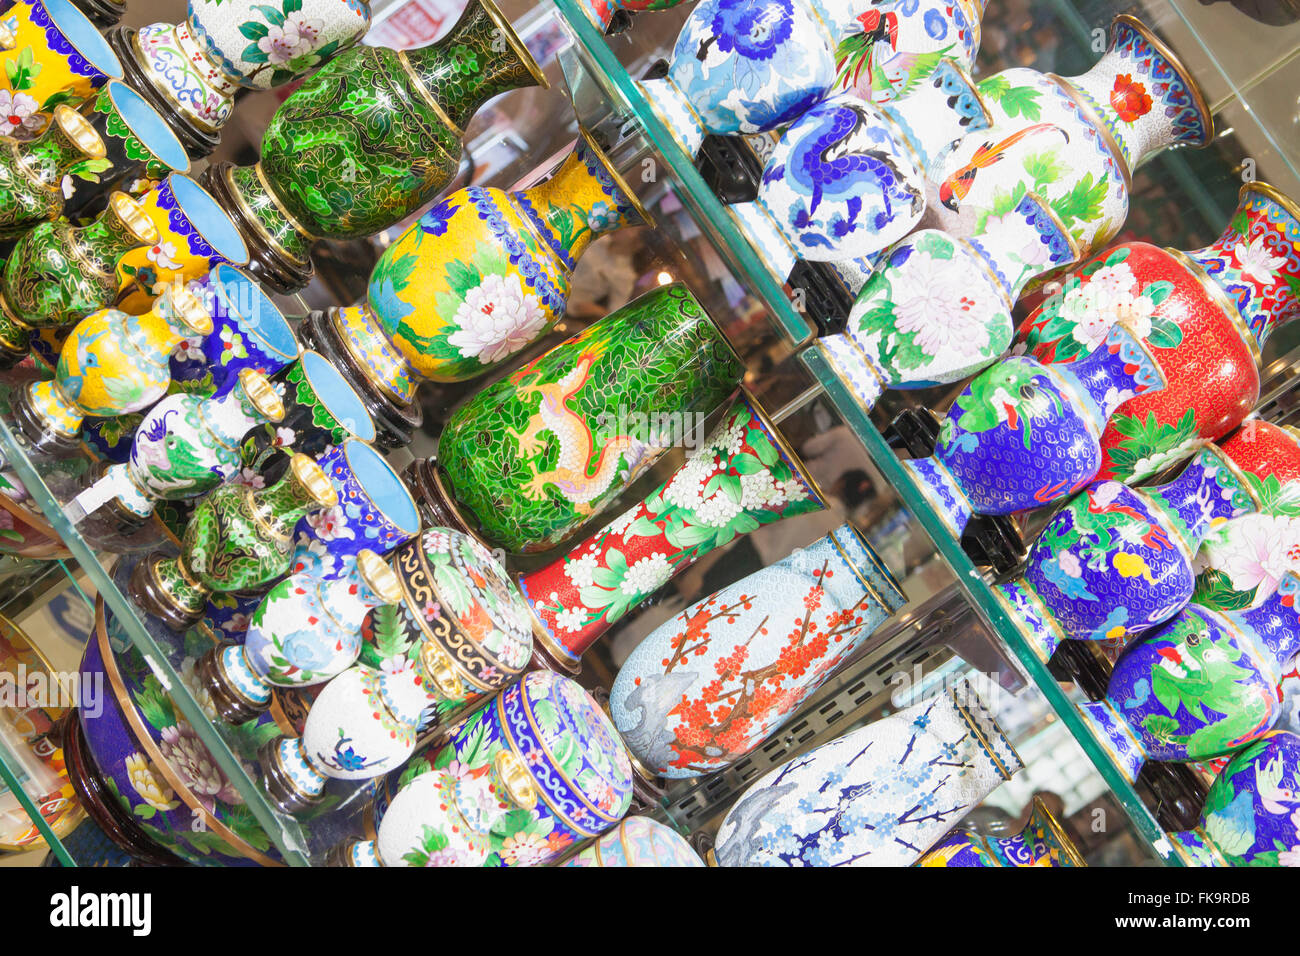 cloisonne jars and vases in a shopping mall, Beijing, China Stock Photo